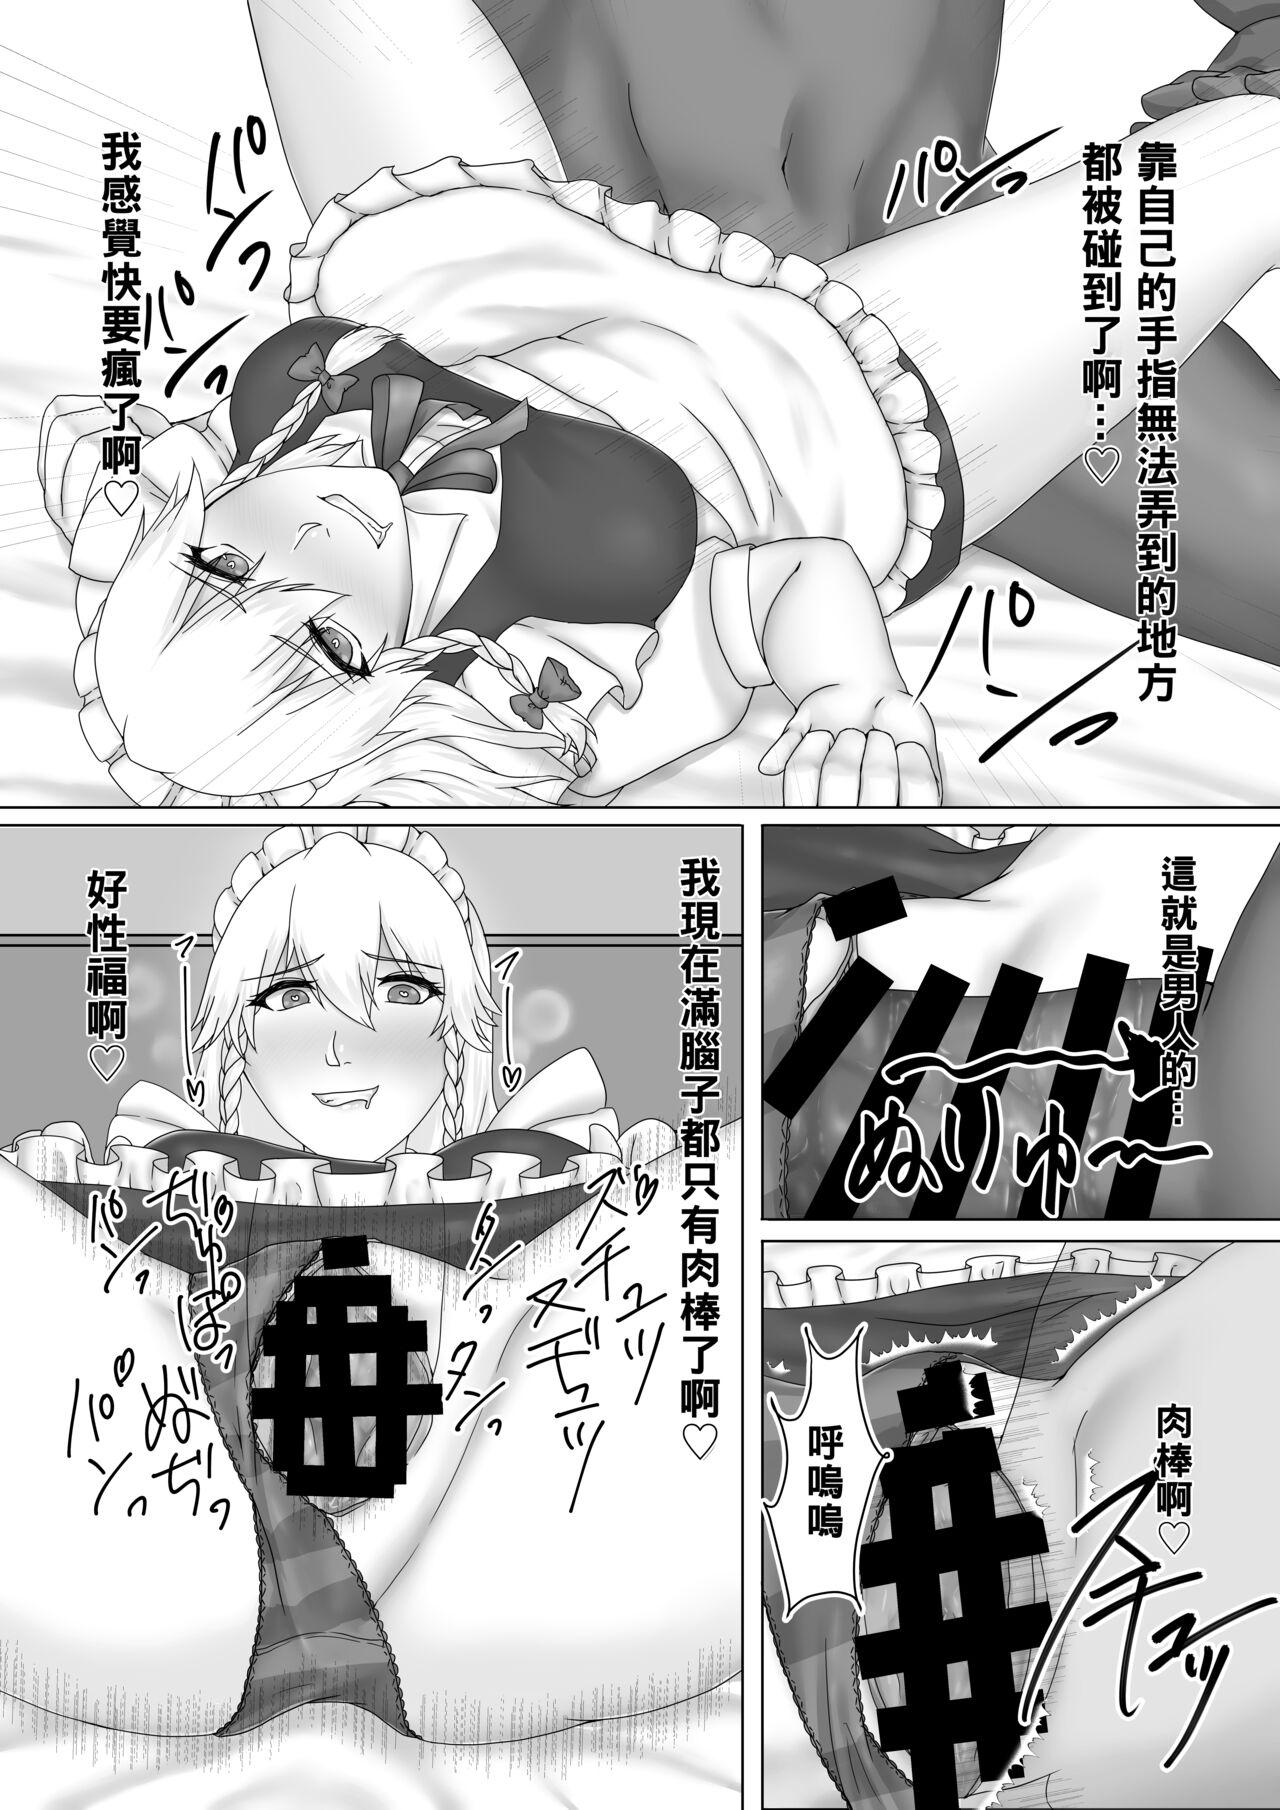 Spycam [糖質過多ぱると (只野めざし)] 咲夜さんとセフレになる本 (東方Project)（Chinese） - Touhou project Gay 3some - Page 9